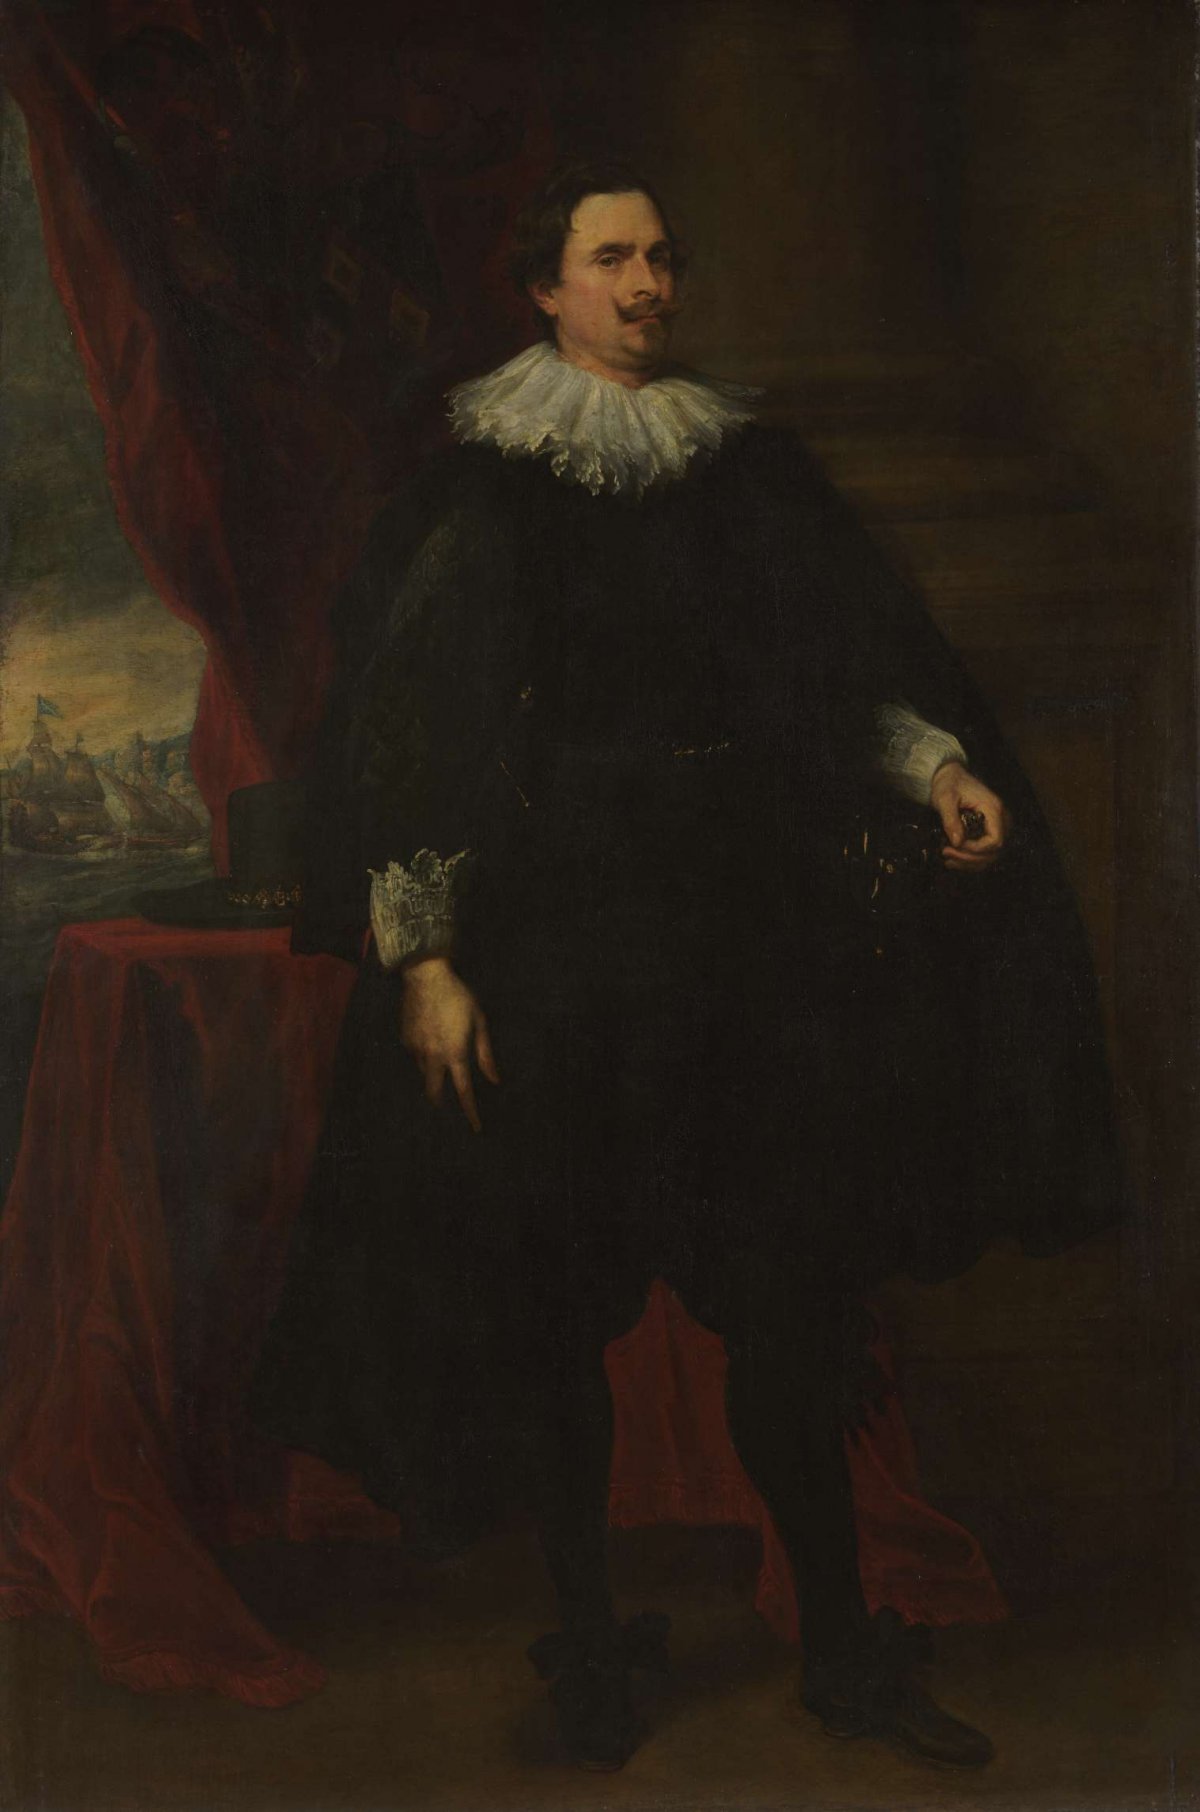 Portrait of a Male Member of the Van der Borcht Family, Anthony van Dyck, c. 1635